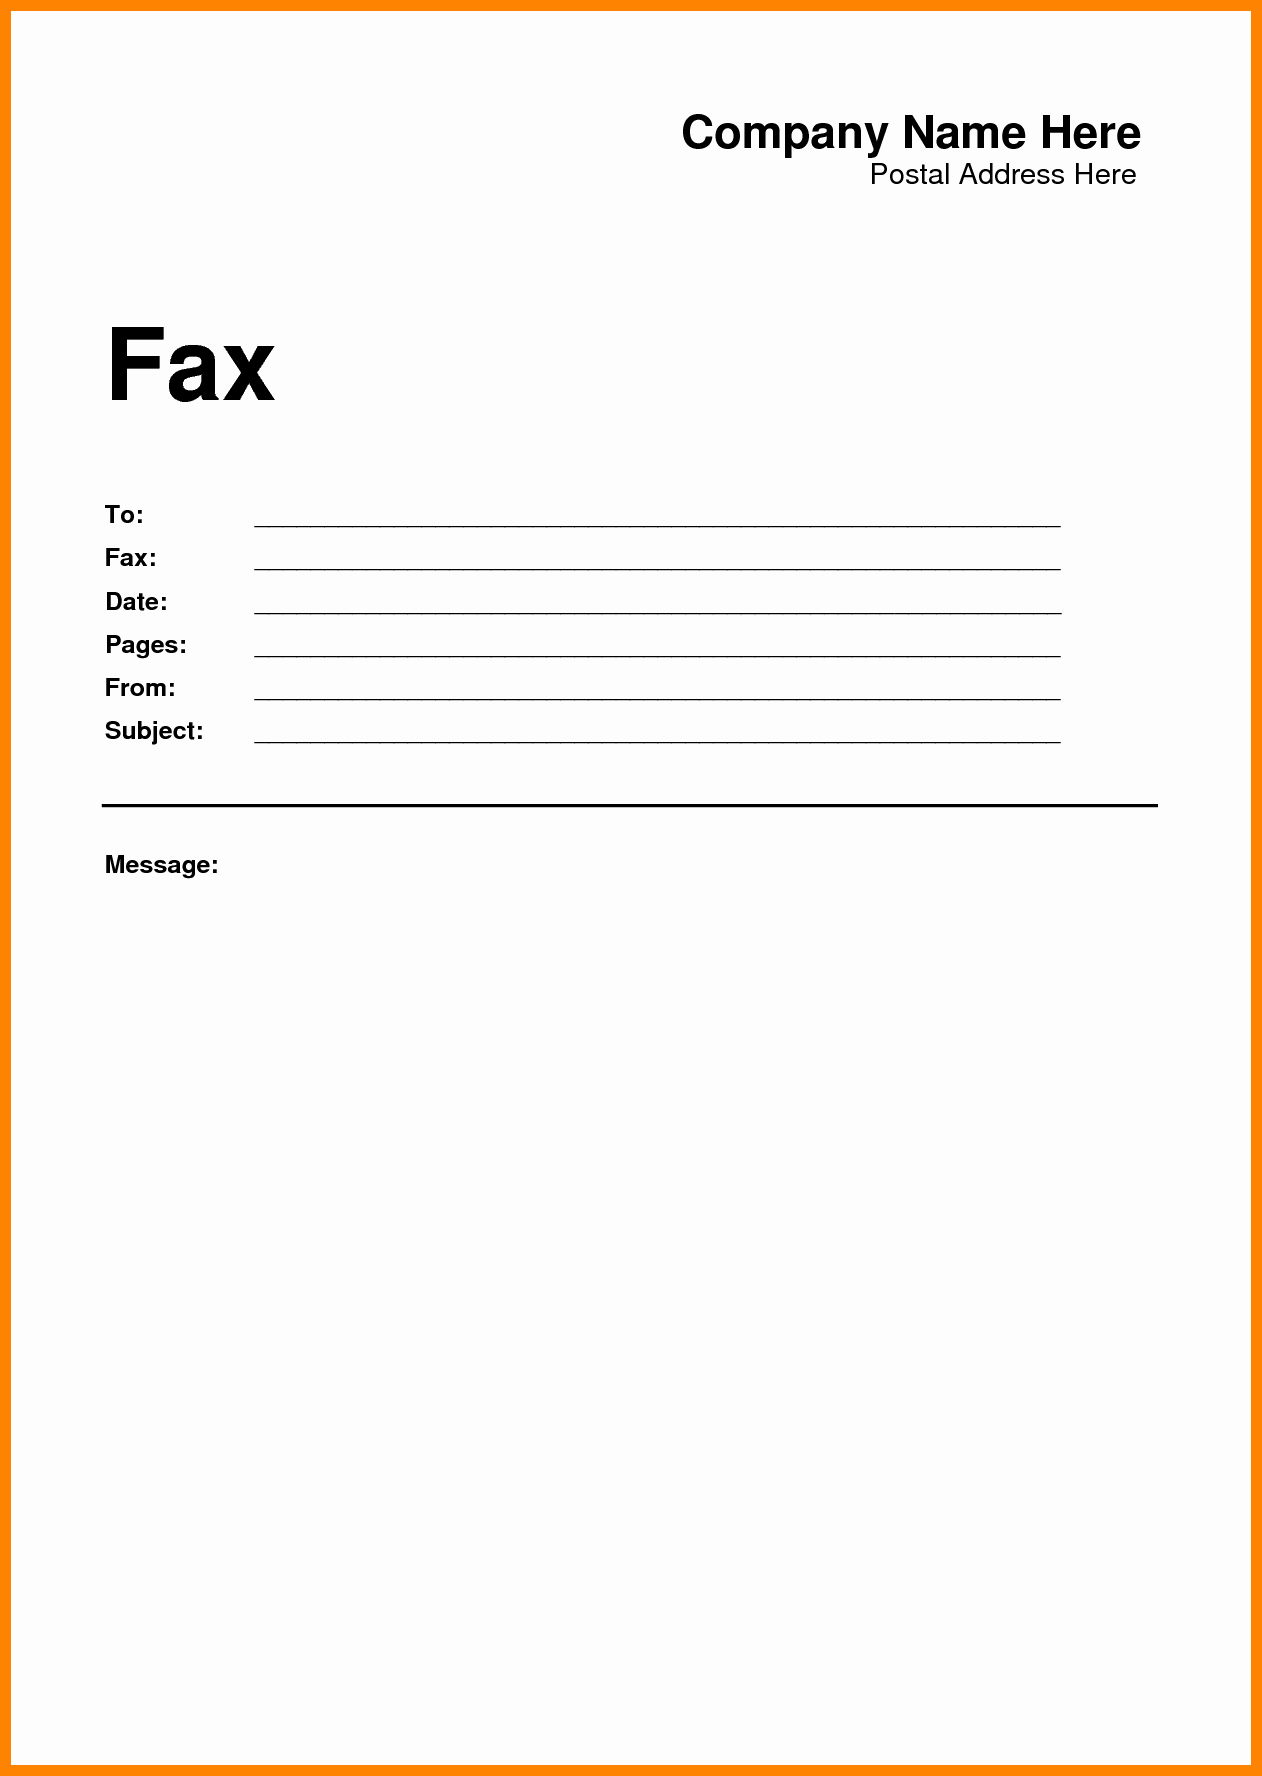 Free Fax Cover Sheets Templates Lovely 6 Free Fax Cover Sheet